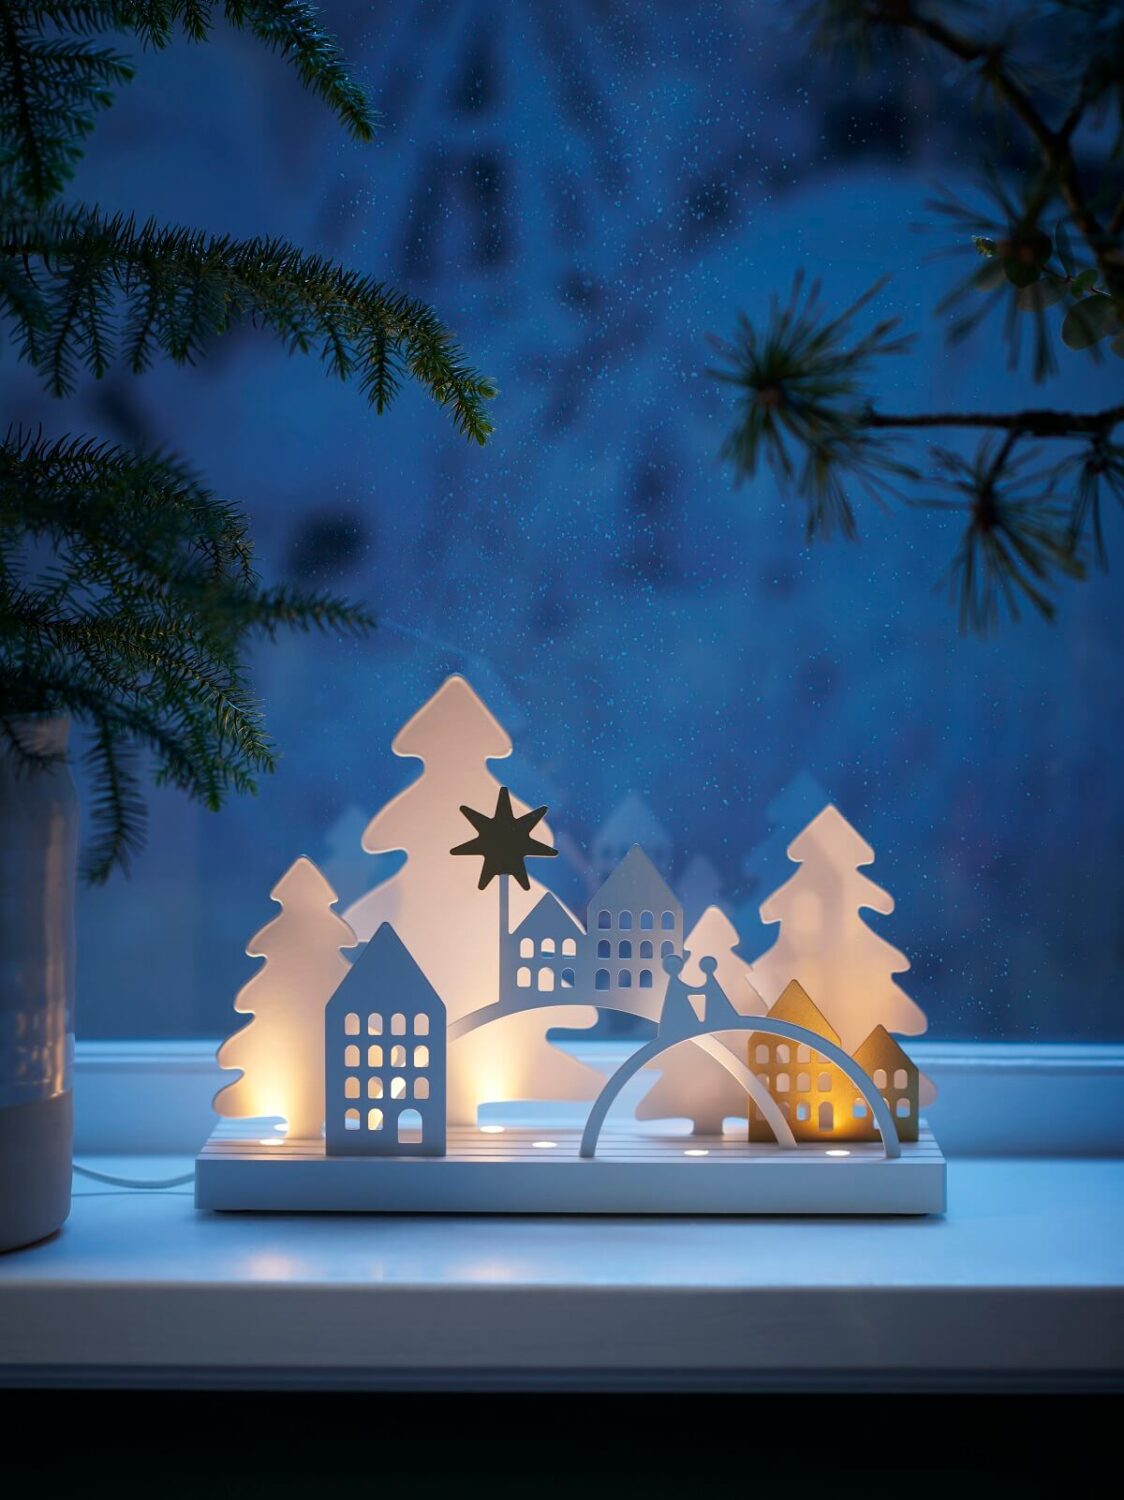 ikea-christmas-led-table-decorations-nordroom